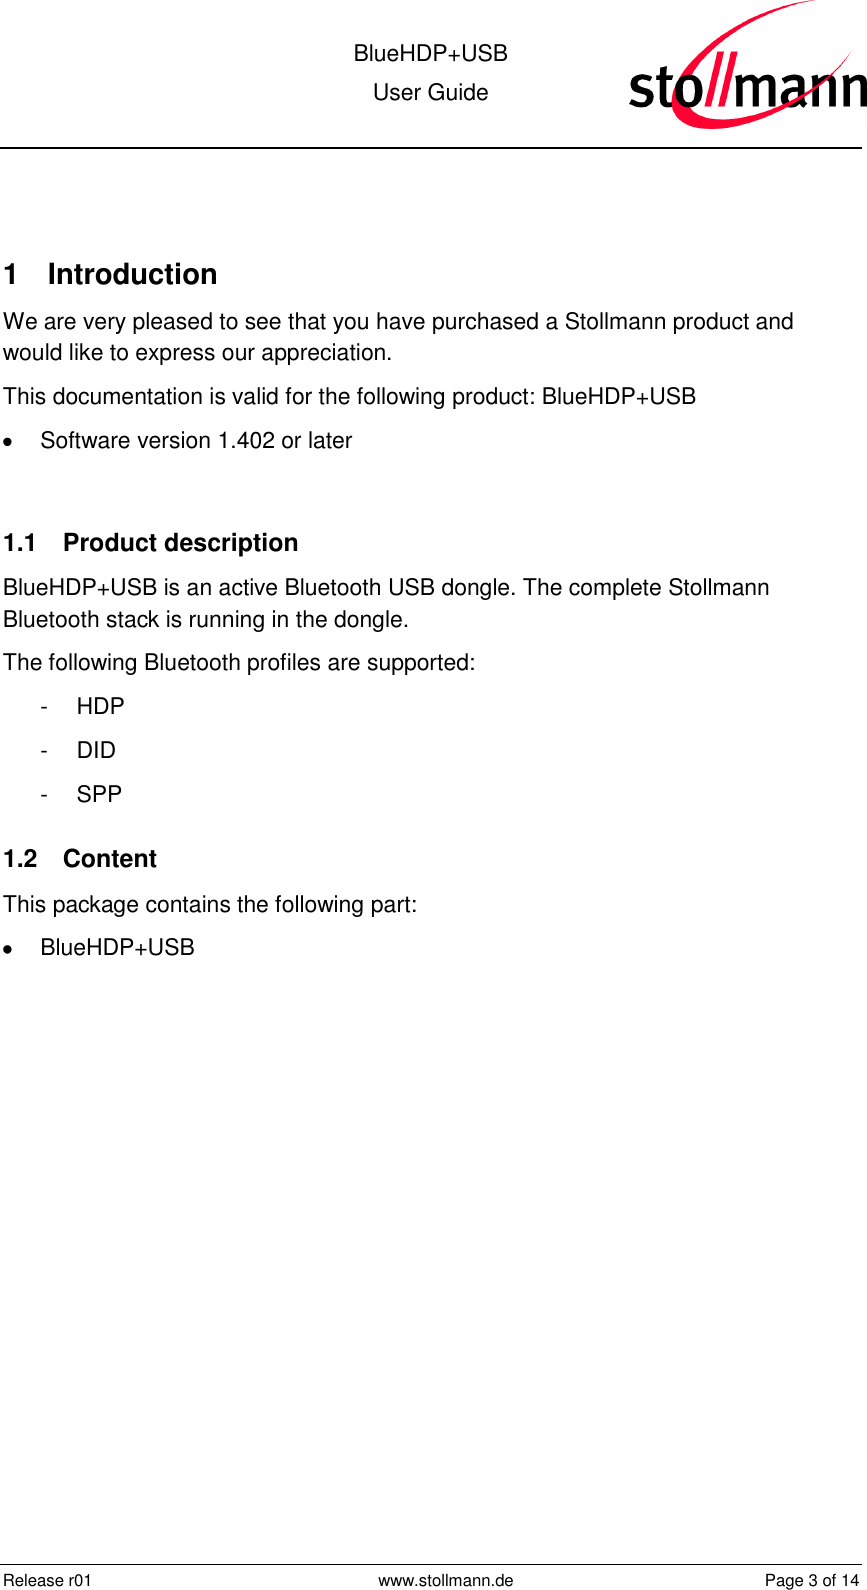  BlueHDP+USB User Guide  Release r01  www.stollmann.de  Page 3 of 14   1  Introduction We are very pleased to see that you have purchased a Stollmann product and would like to express our appreciation. This documentation is valid for the following product: BlueHDP+USB   Software version 1.402 or later  1.1  Product description BlueHDP+USB is an active Bluetooth USB dongle. The complete Stollmann Bluetooth stack is running in the dongle.  The following Bluetooth profiles are supported: -  HDP -  DID -  SPP  1.2  Content This package contains the following part:   BlueHDP+USB  